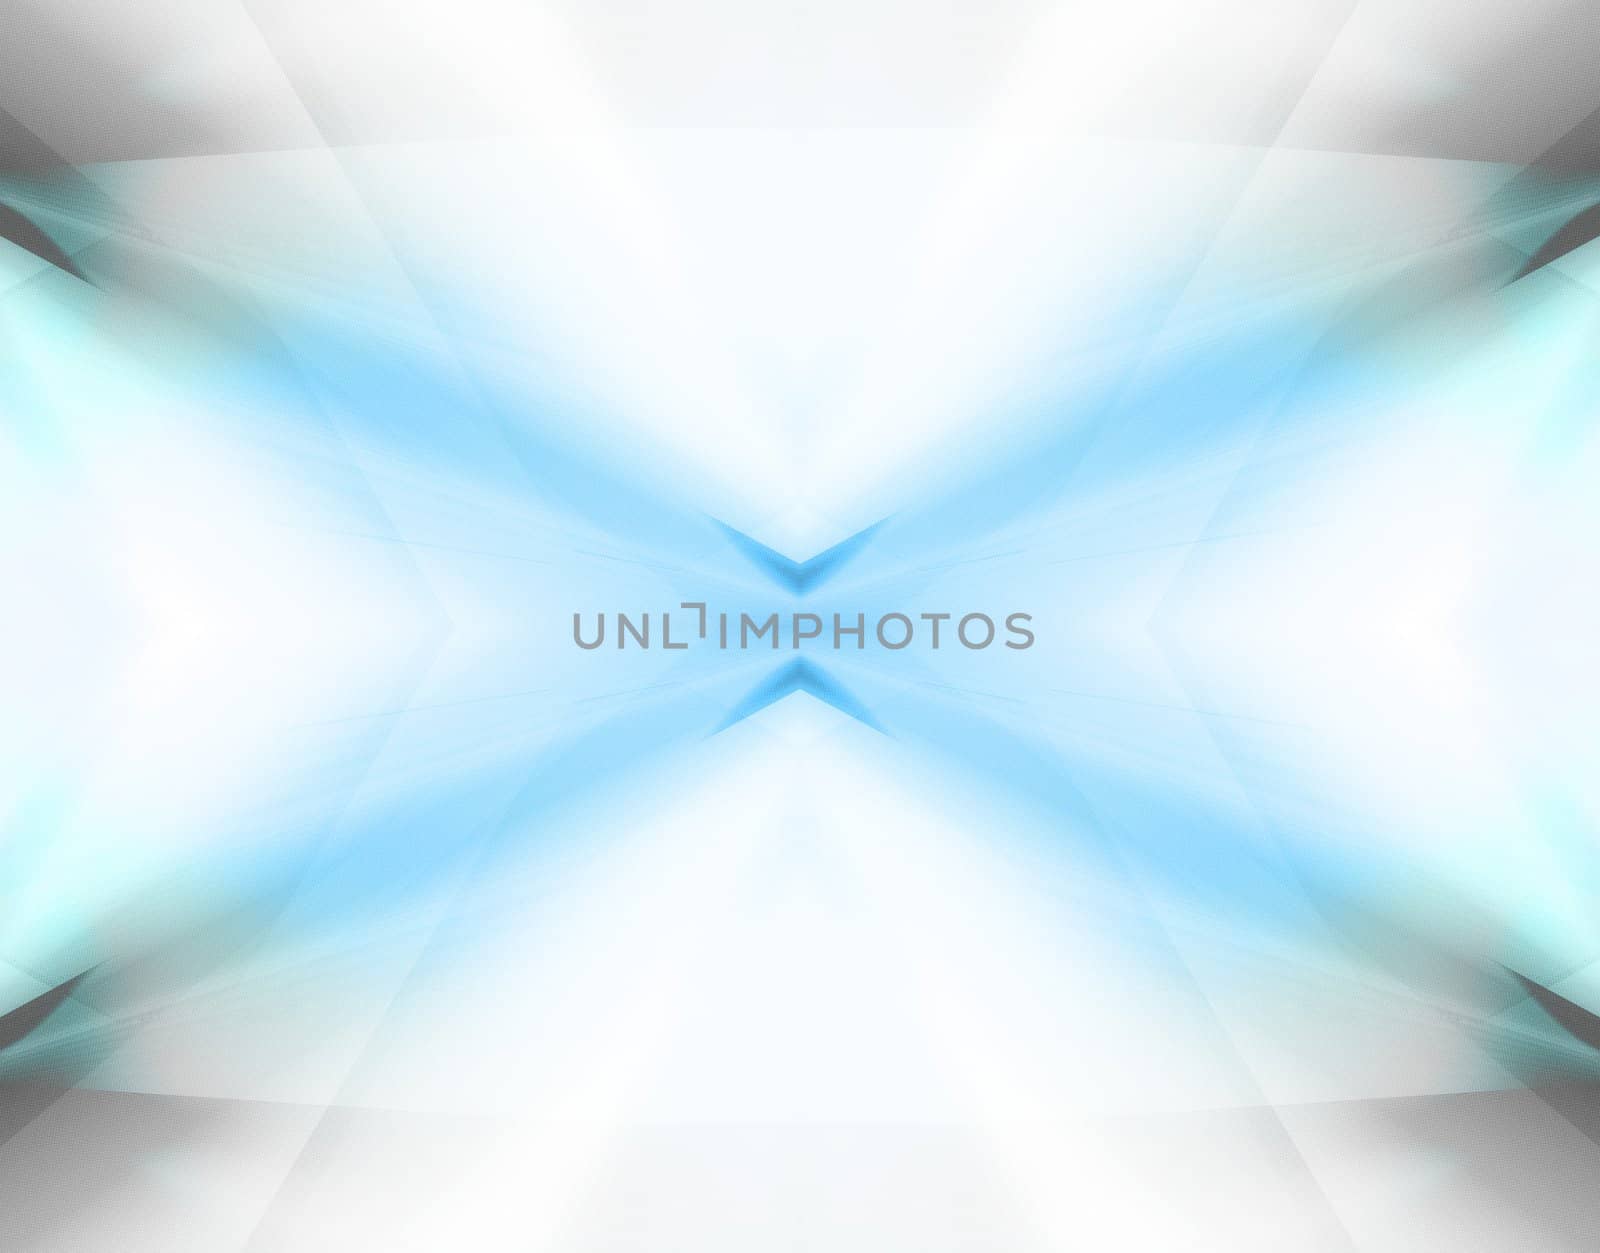 Abstract and futuristic background image in smooth colors.